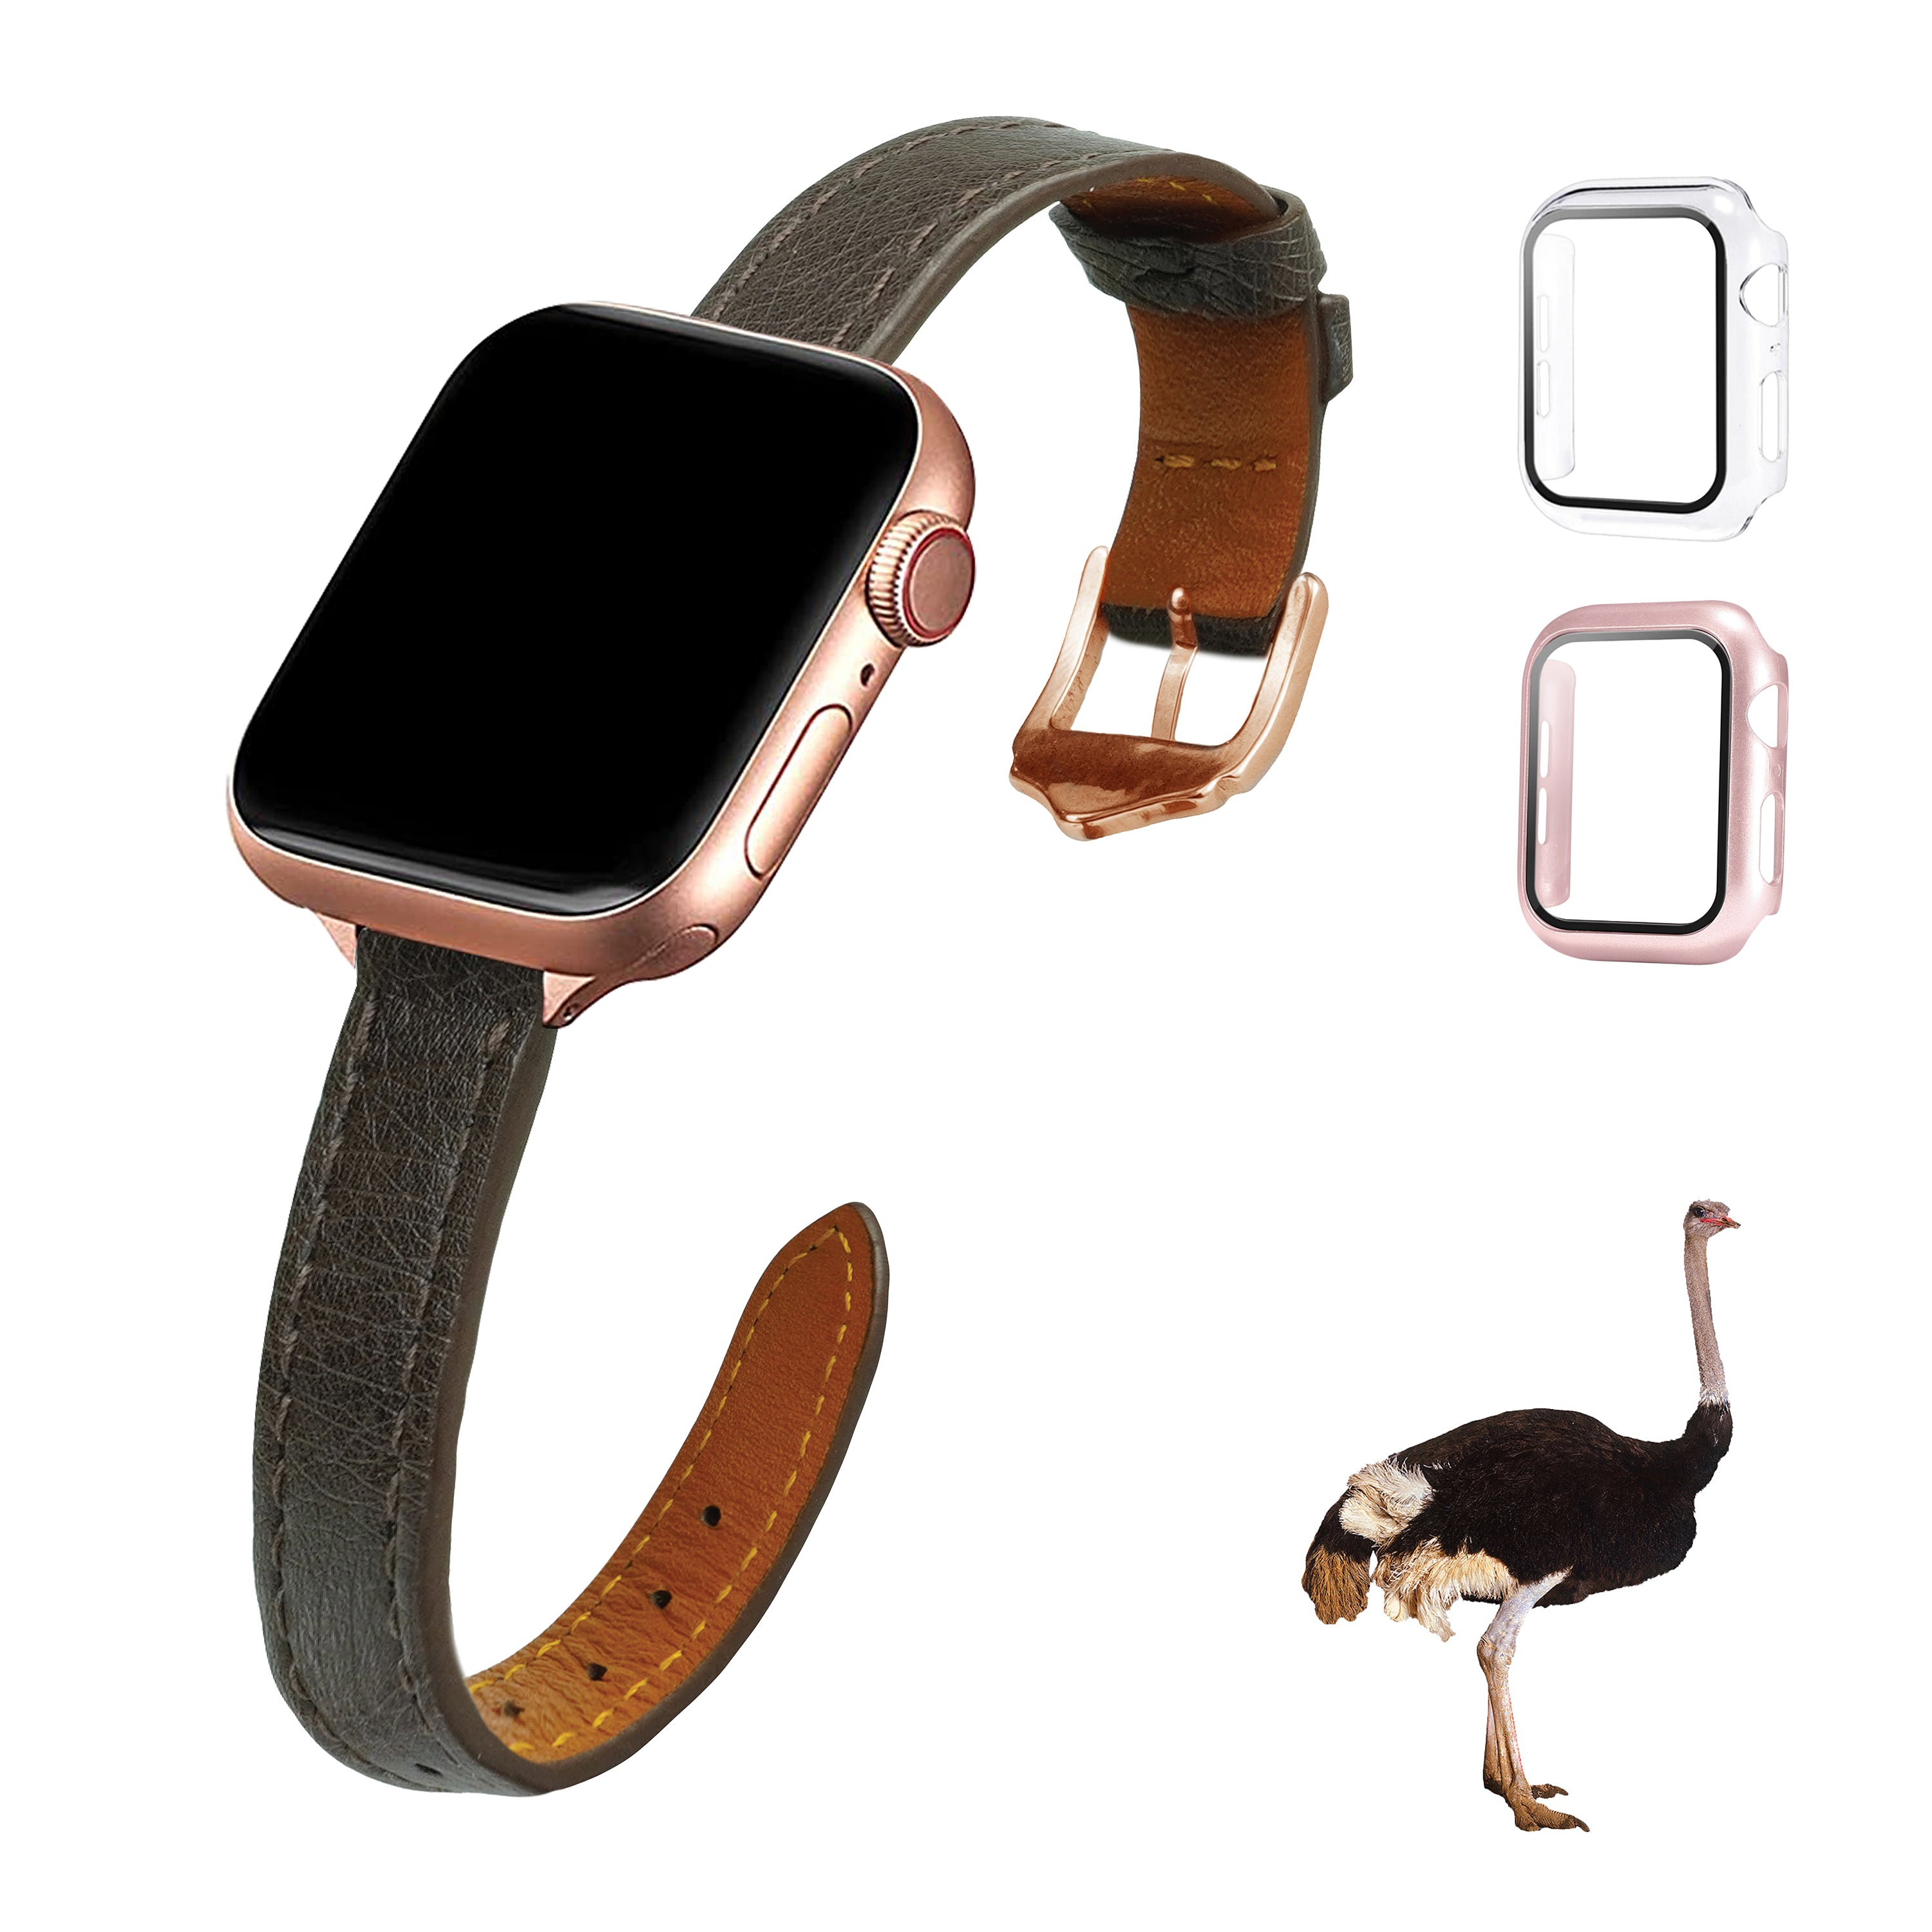 Dark Brown Flat Ostrich Leather Band Compatible Apple Watch Iwatch 38mm Screen Protector Case Gold Adapter Replacement Strap For Smartwatch Series 1 2 3 Leather Handmade AW-183G-W-38MM